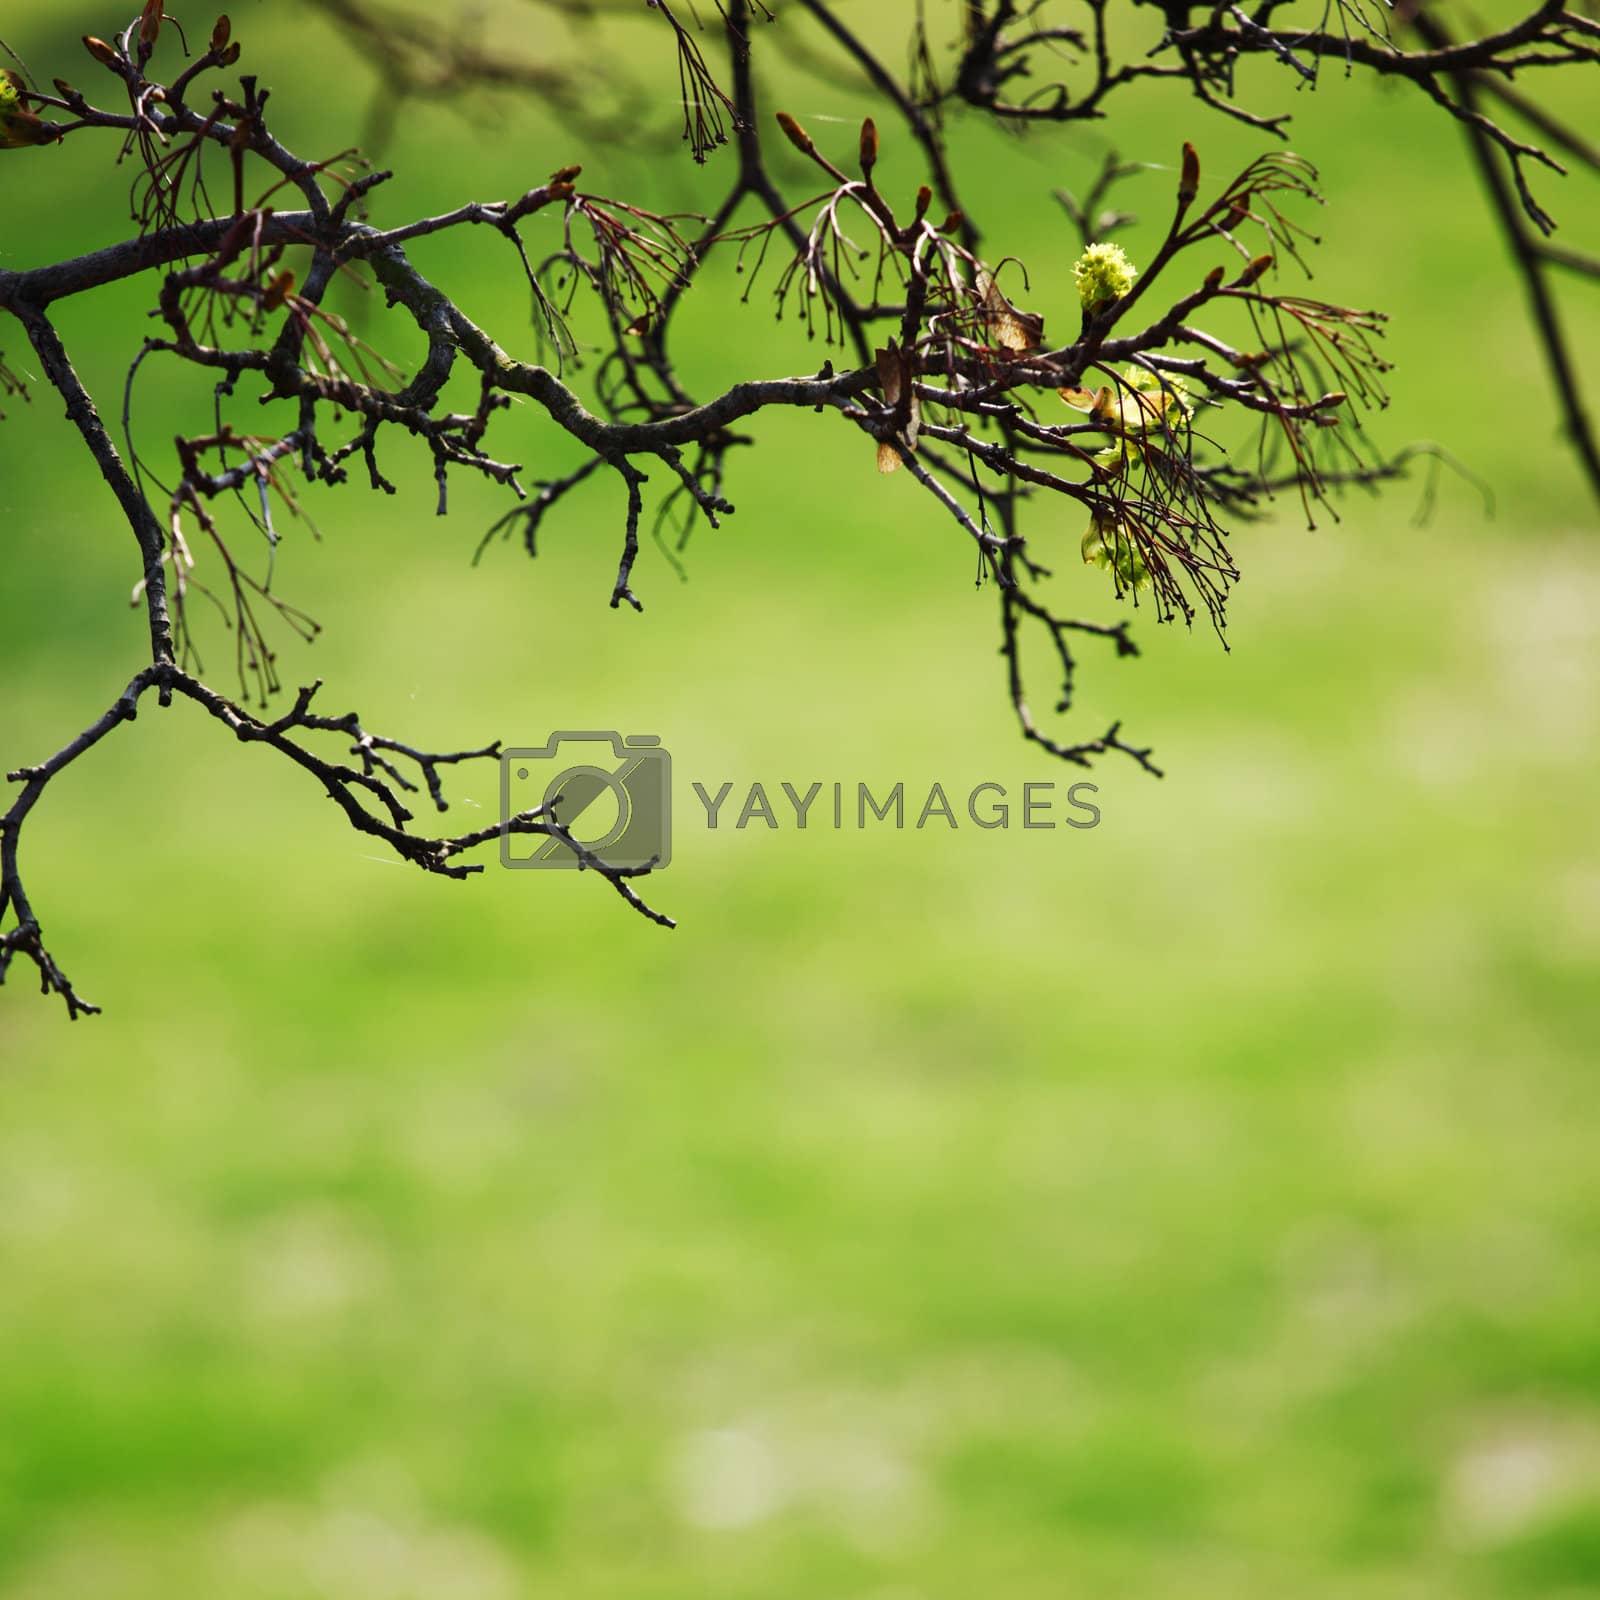 Royalty free image of branches by Yellowj